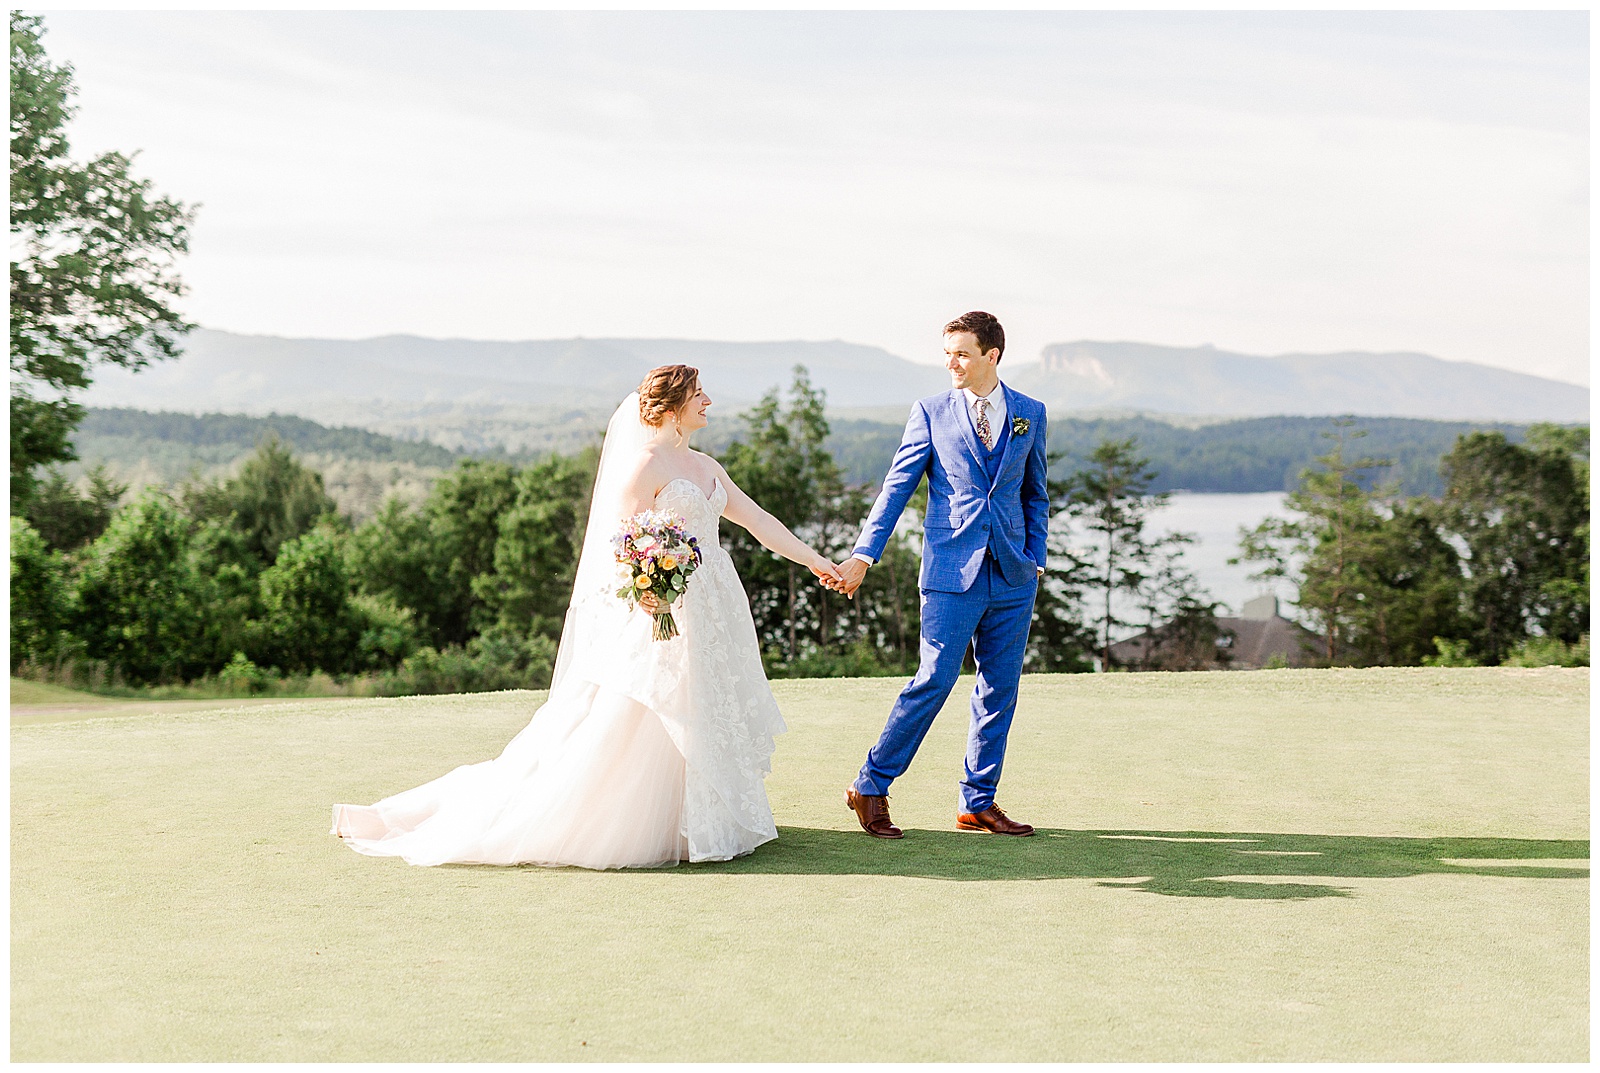 Stunning outdoor mountain photos of Bride and Groom from Outdoorsy Summer Wedding at North Carolina Lakehouse | check out the full wedding at KevynDixonPhoto.com